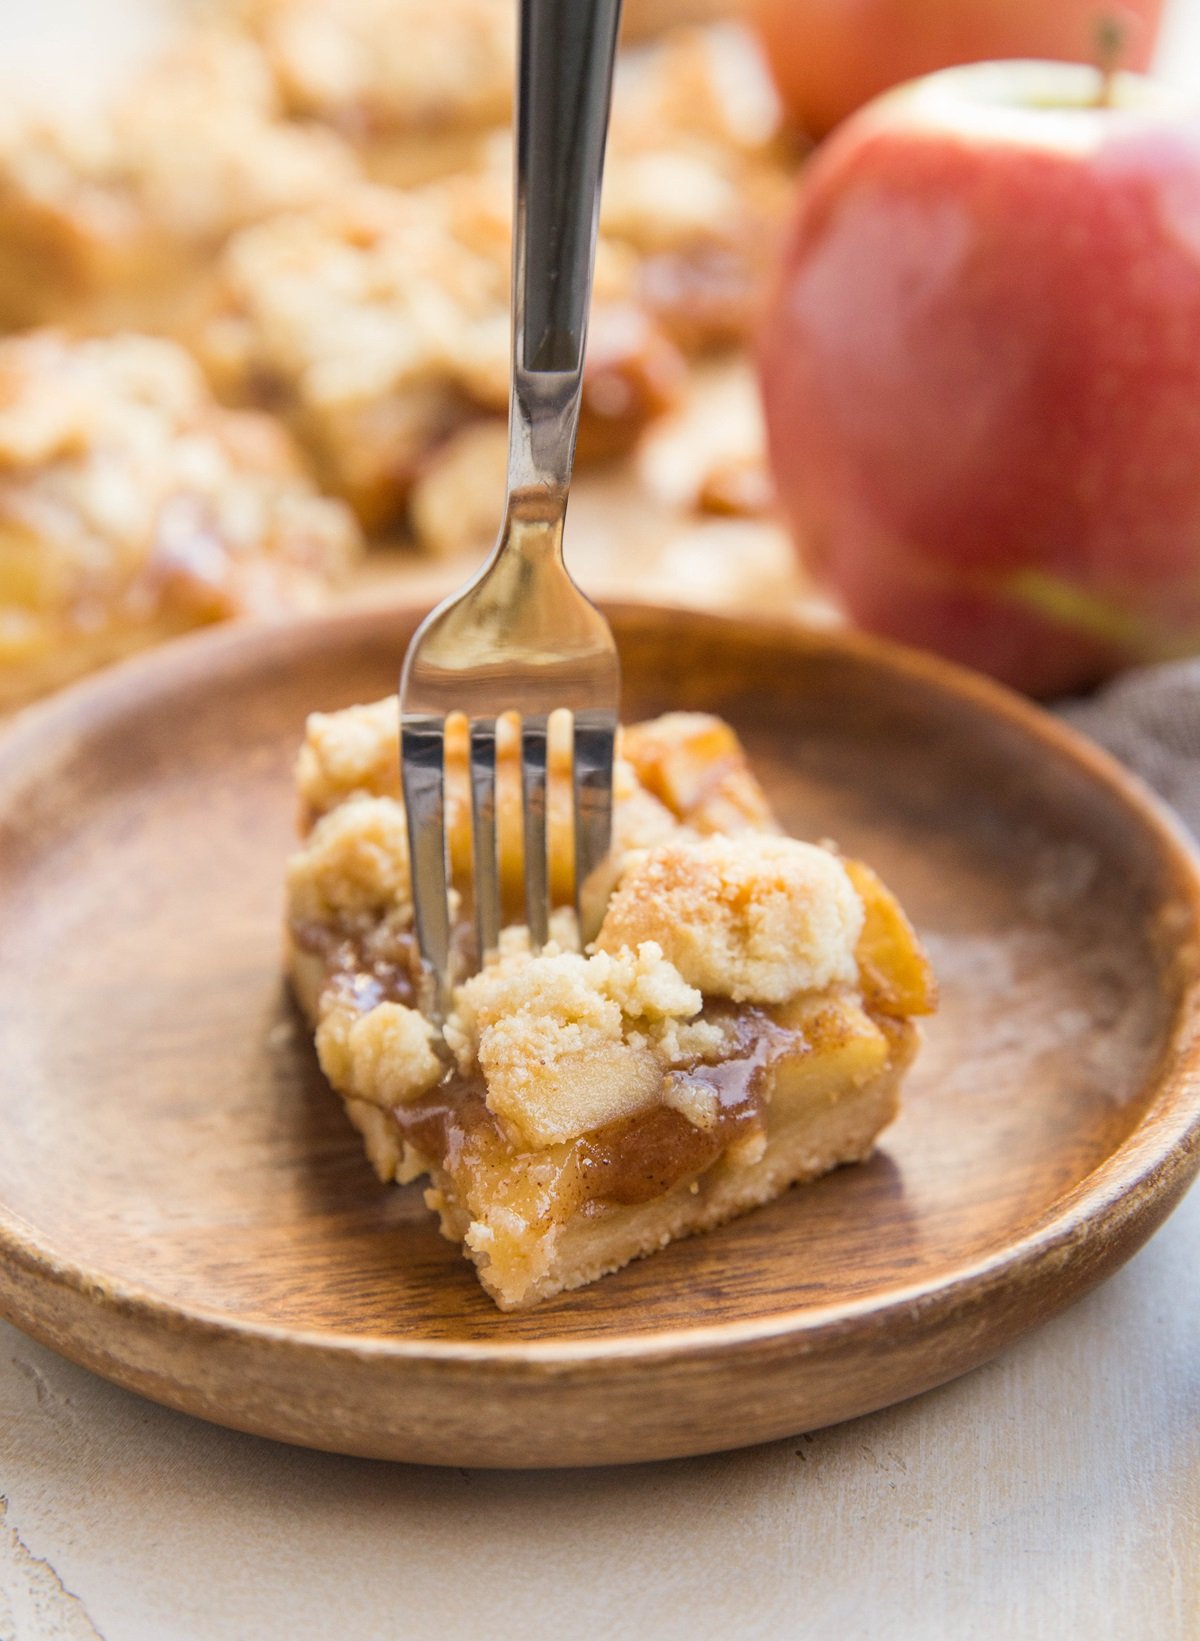 Vegan Paleo Apple Pie Bars made with only 6 ingredients! Grain-free, refined sugar-free, dairy-free and delicious!